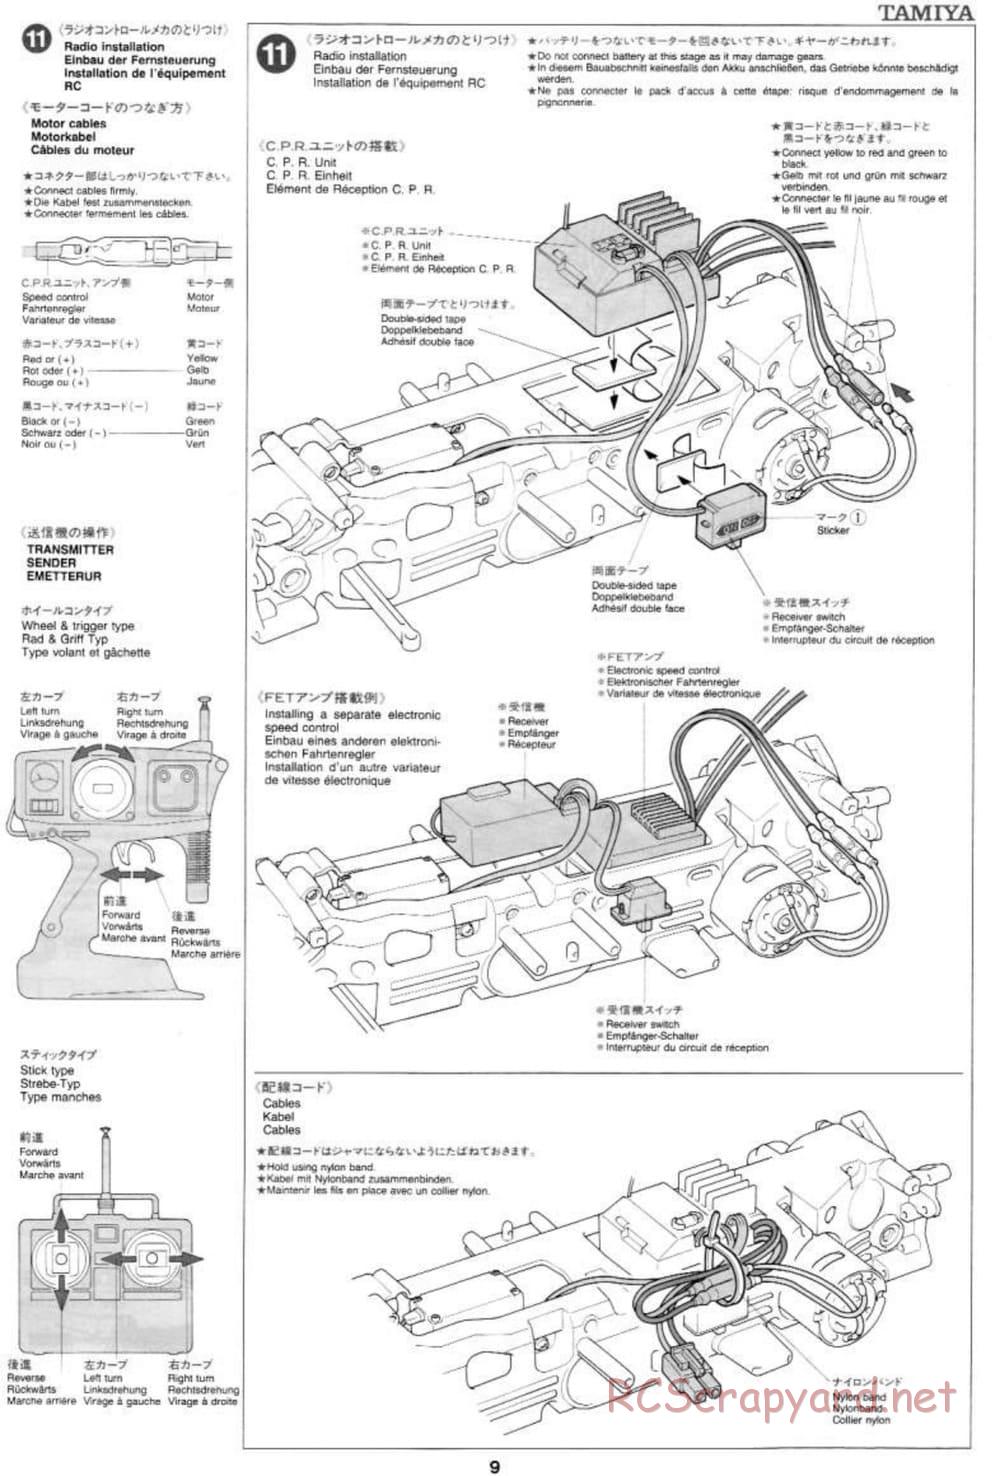 Tamiya - Toyota Celica GT-Four 97 Monte Carlo - TL-01 Chassis - Manual - Page 9